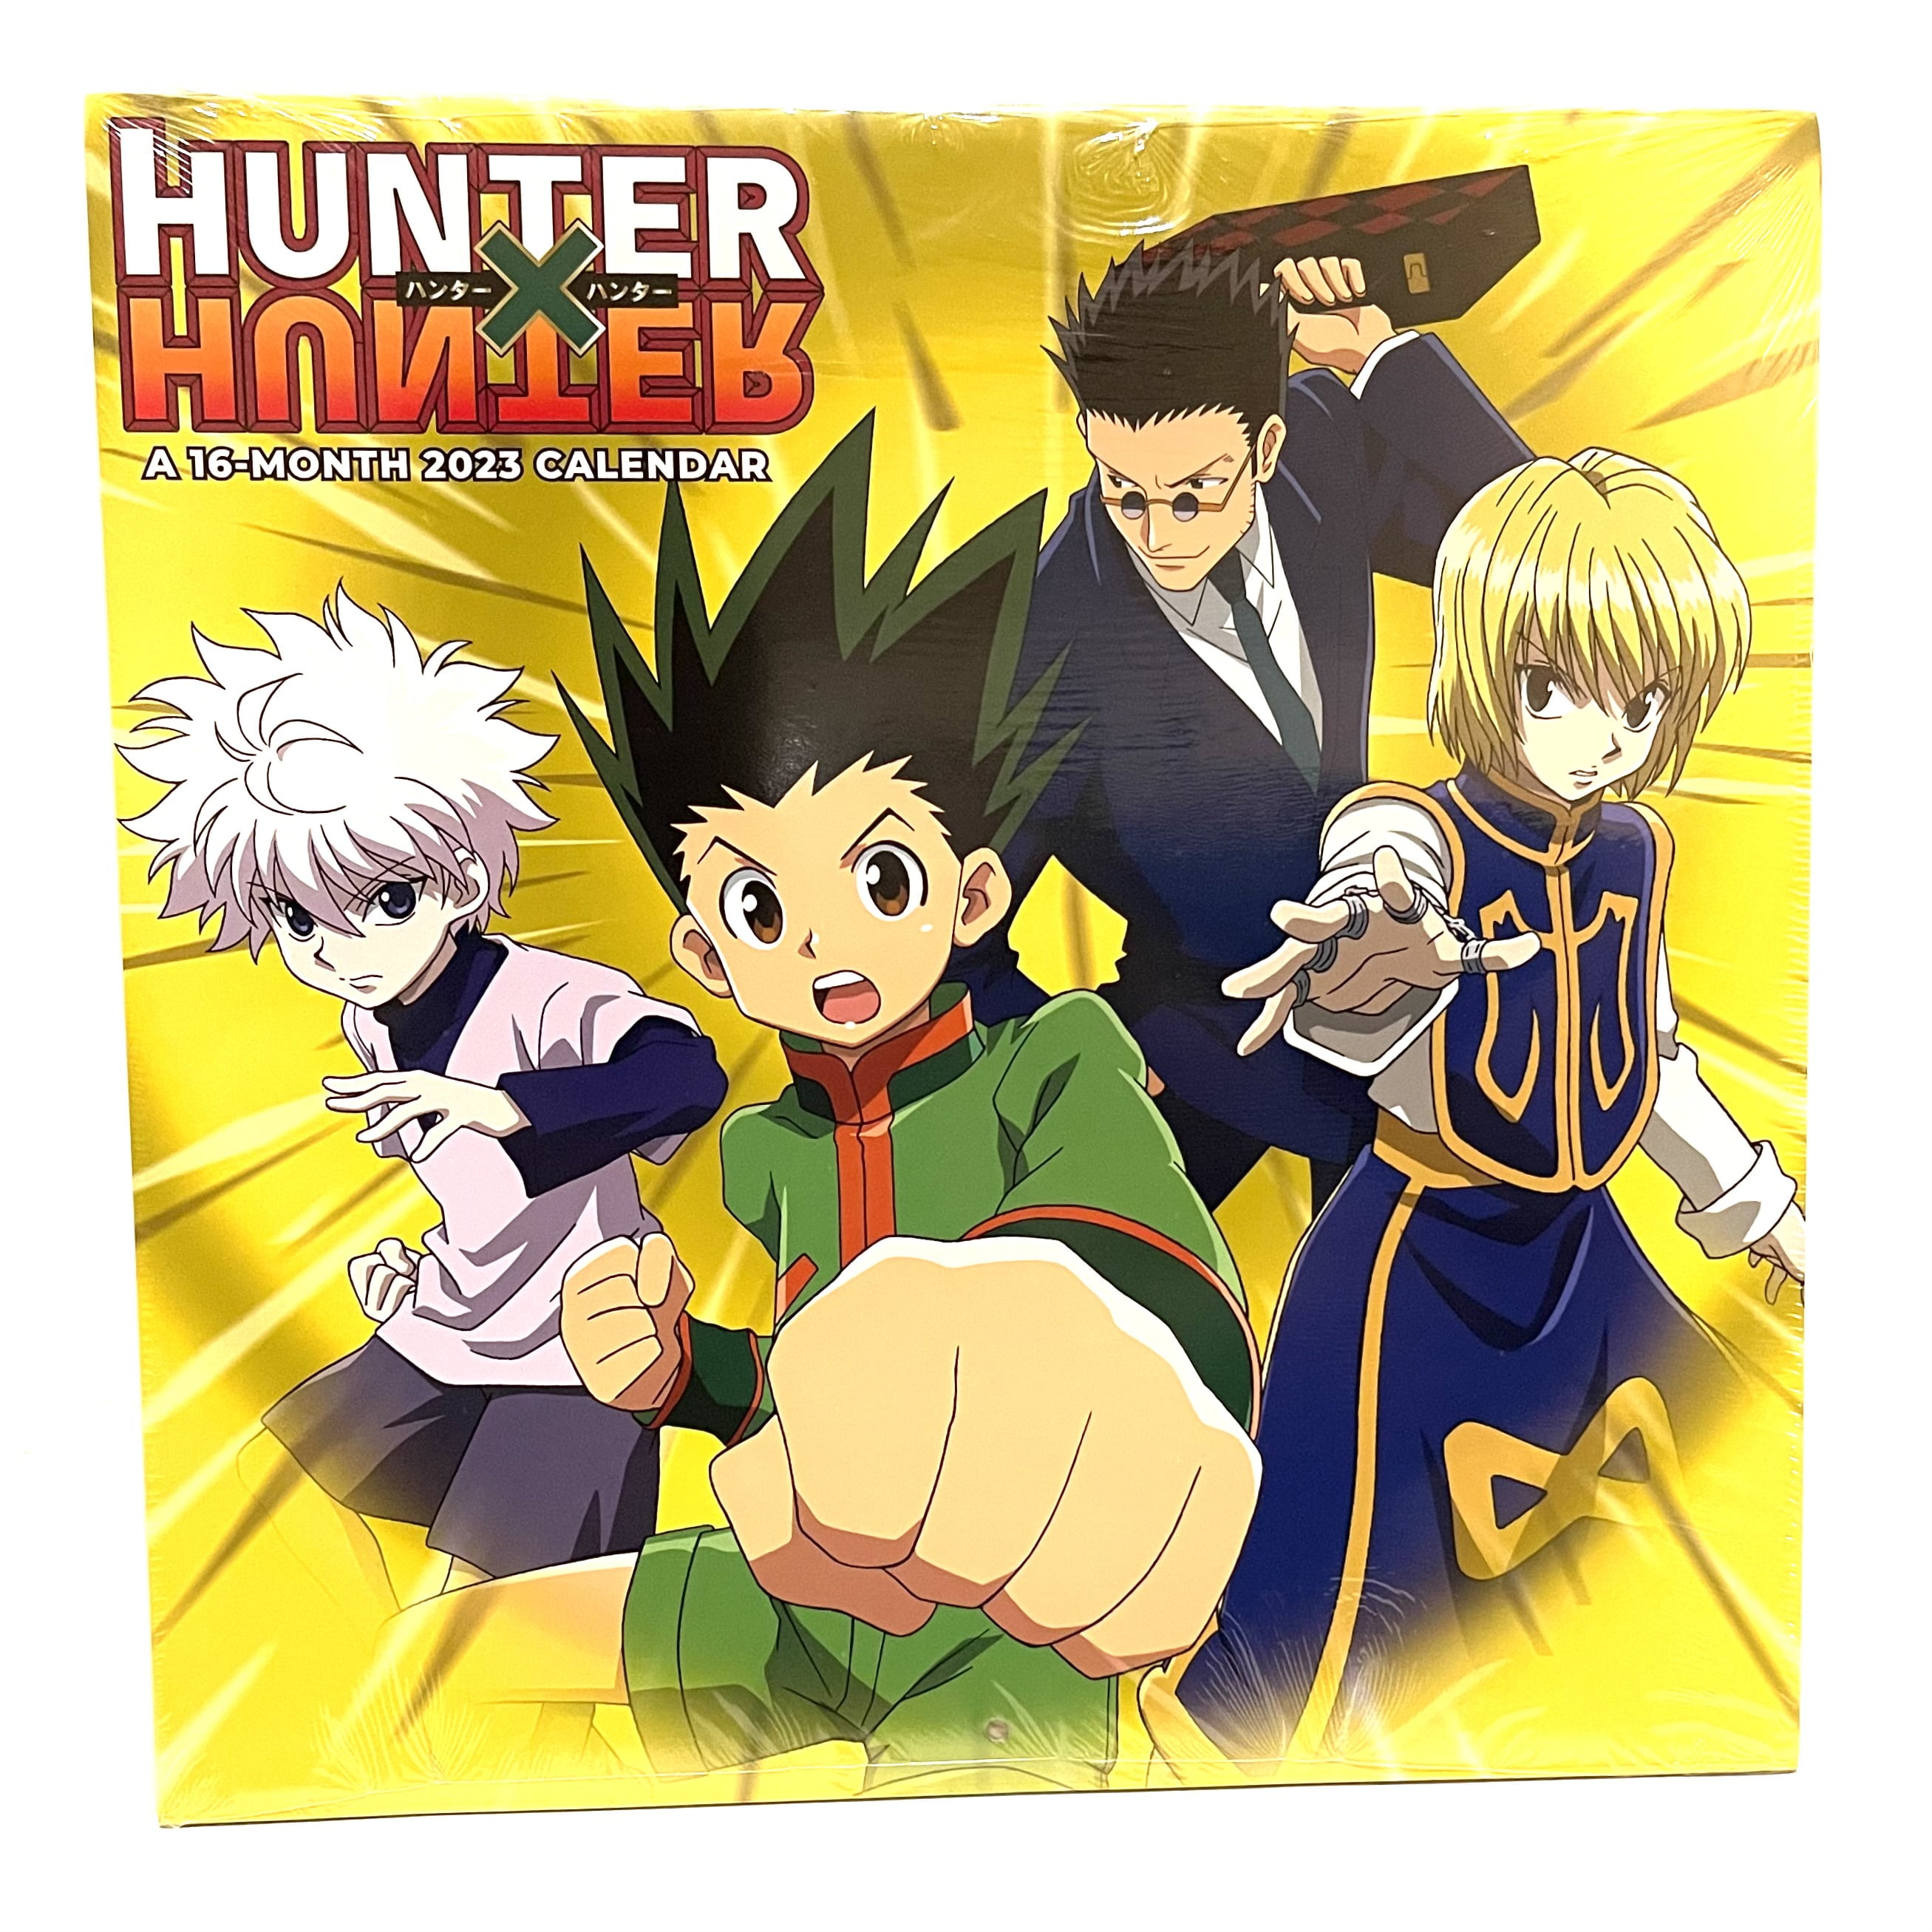 HUNTER X HUNTER 20222023 planner Anime 20222023 weekly planner calendar  journal notebook for kids girls boys teens adults men women otakus   ages 6 x 9 inches simple designed planner by  Amazonae